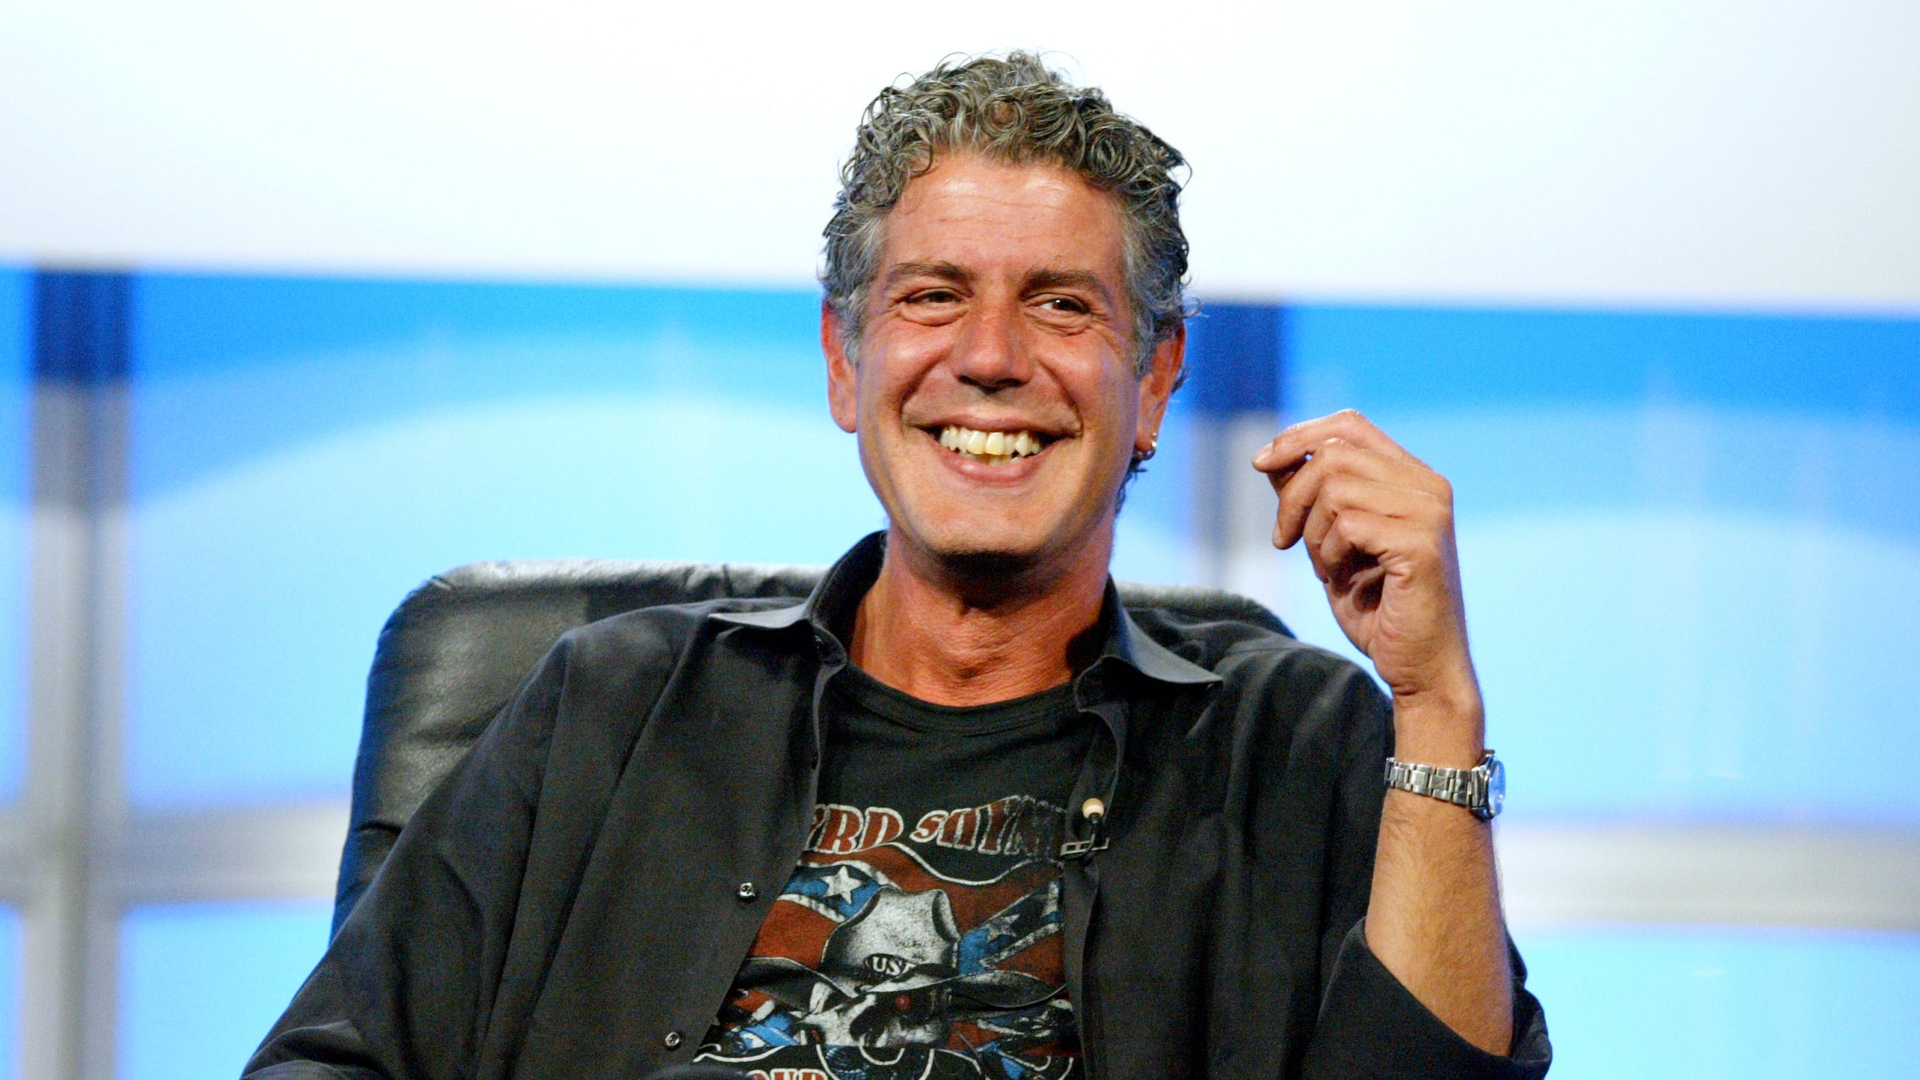 Remembering Anthony Bourdain 6 years after his tragic death